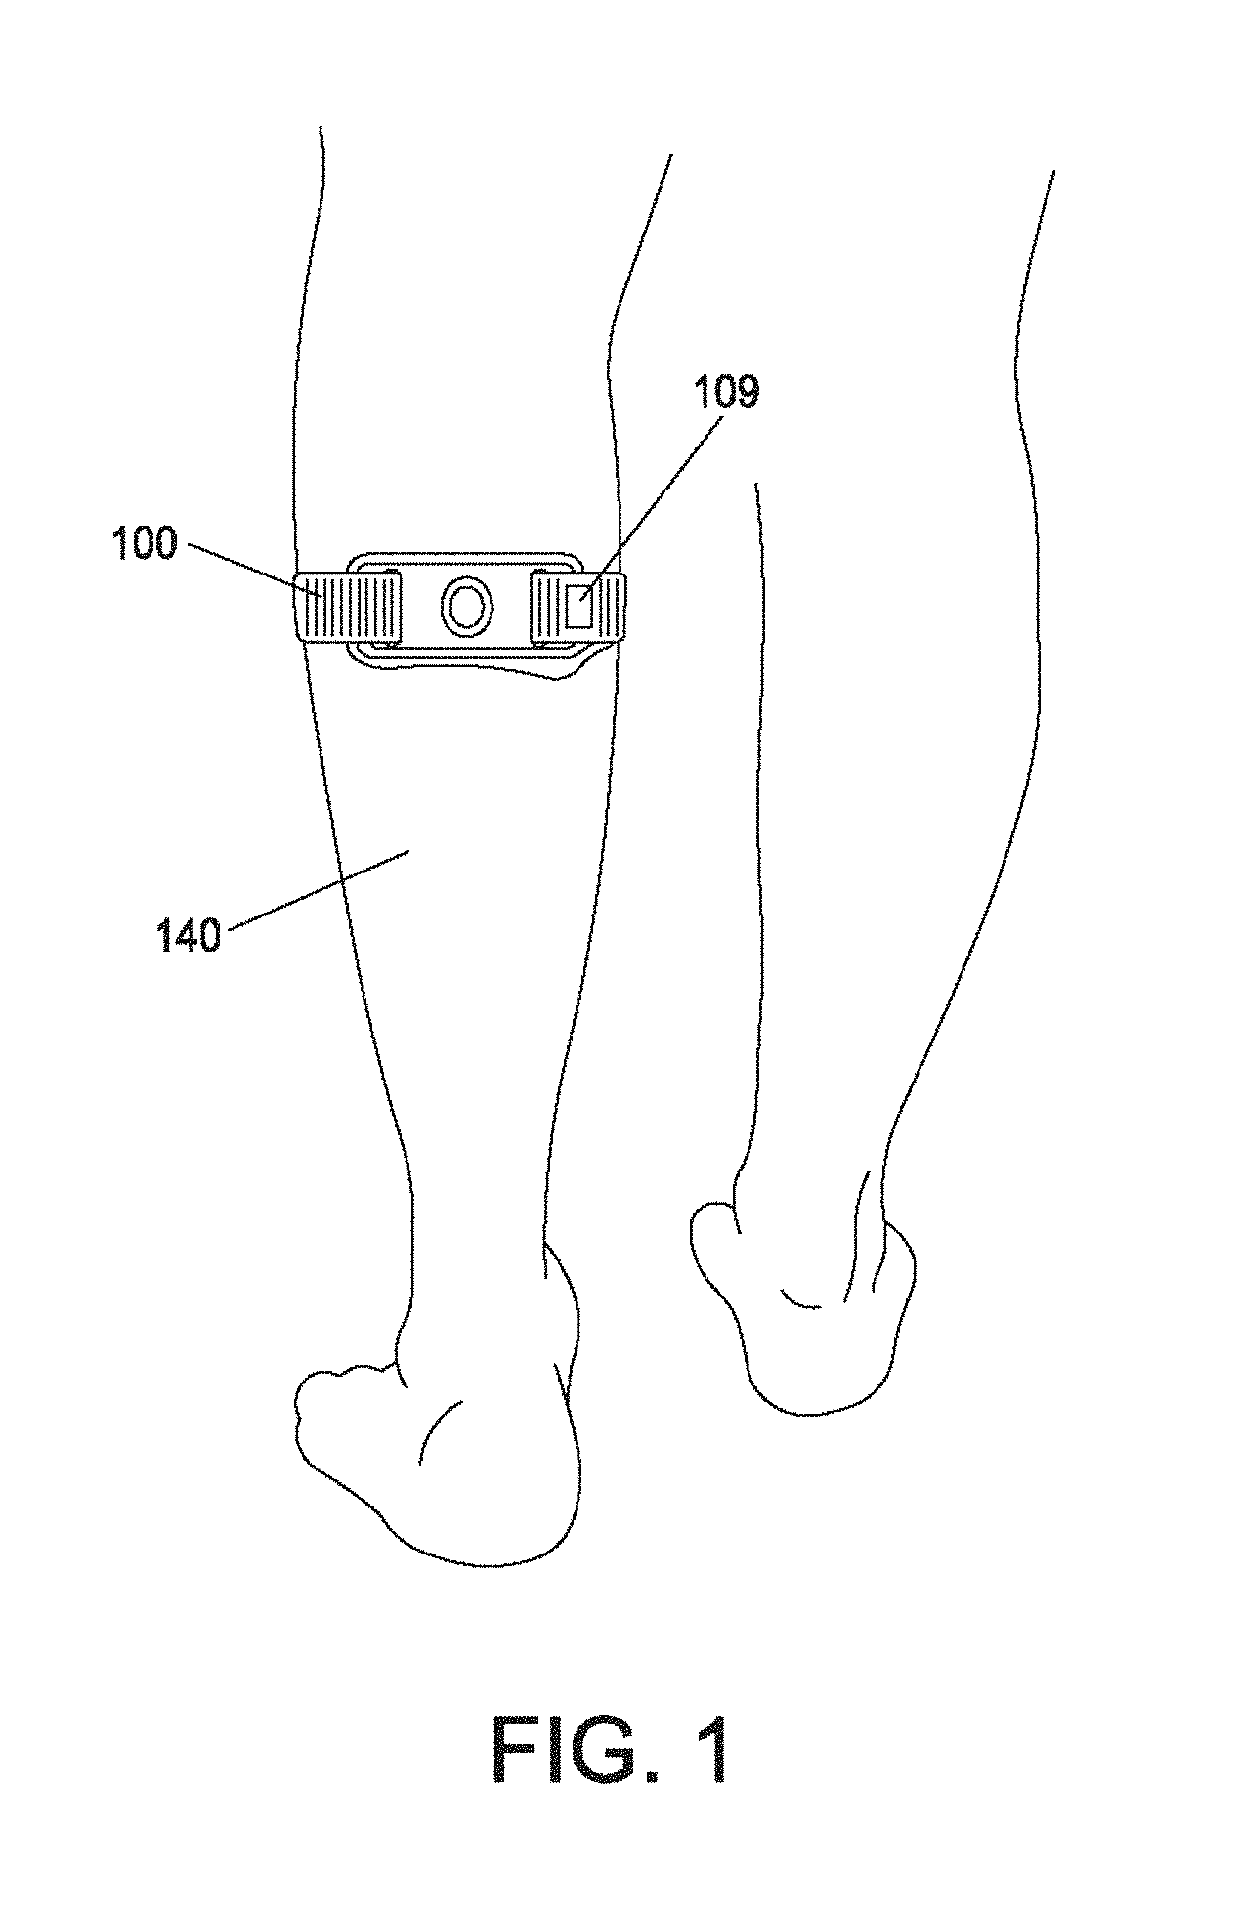 Dynamic control of transcutaneous electrical nerve stimulation therapy using continuous sleep detection